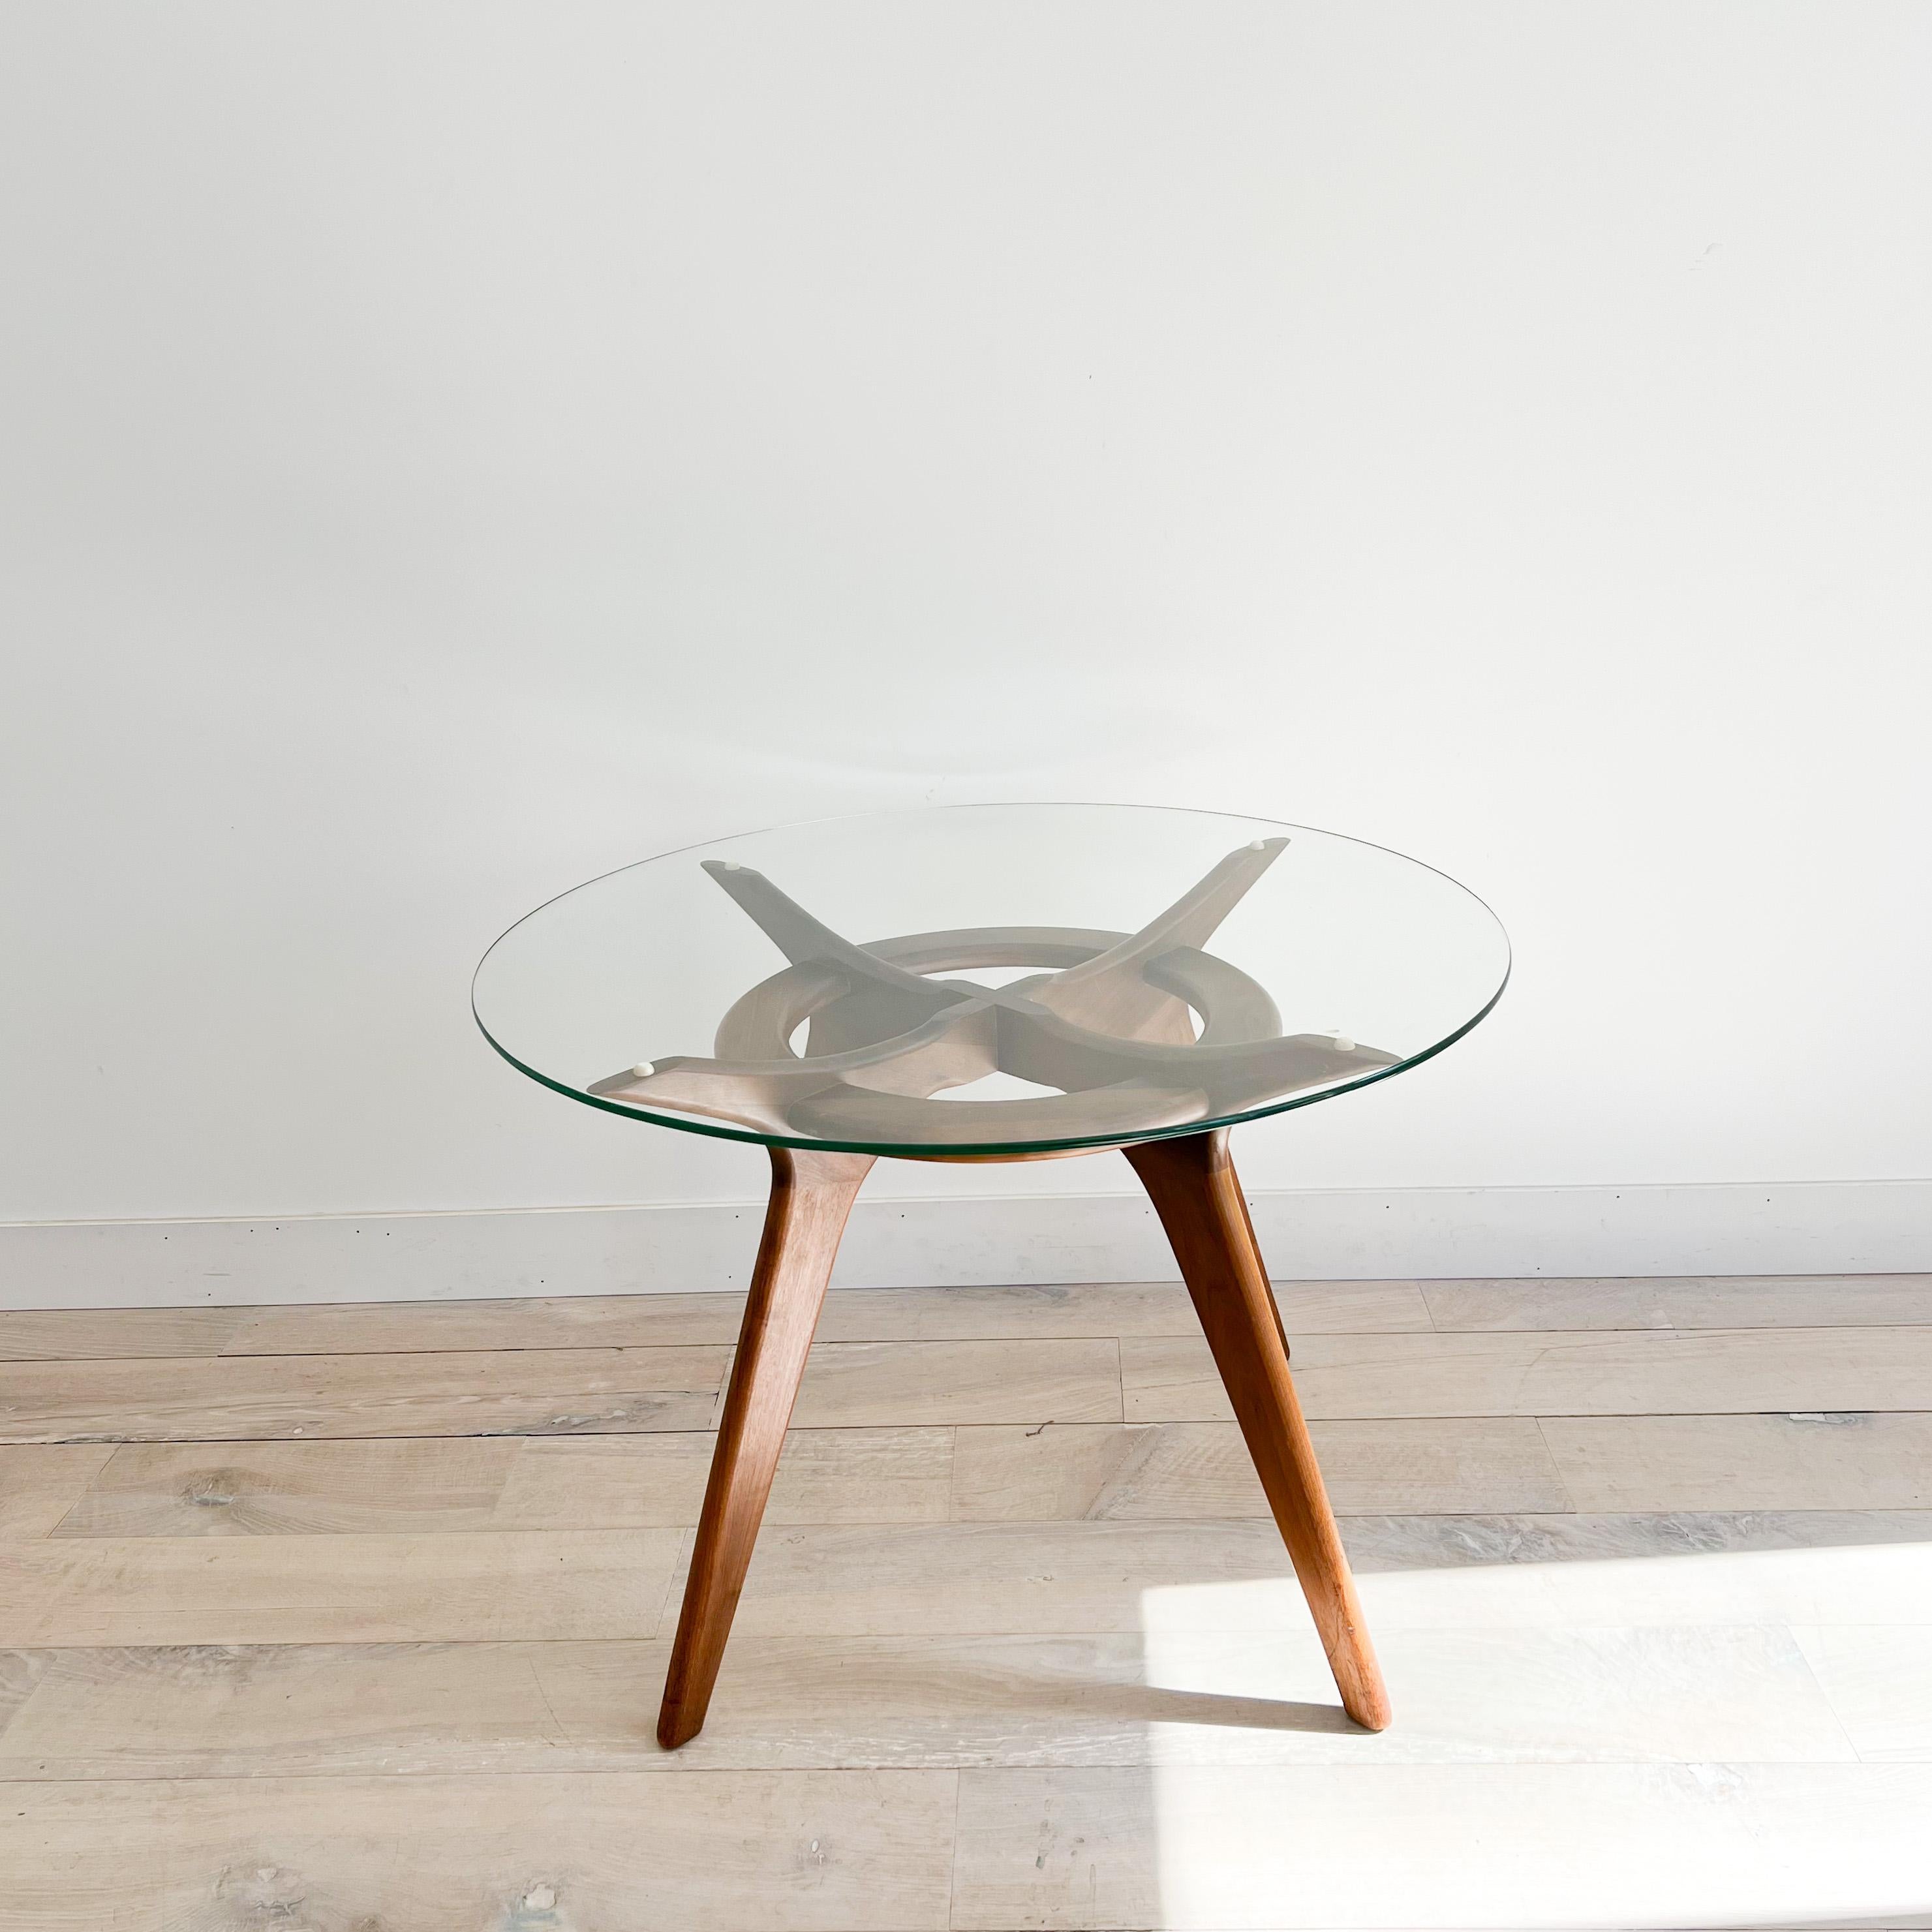 Mid century modern dining table with sculpted walnut base and round glass top by Adrian Pearsall. Known as the Compass table. Some light scuffing/scratching to the glass top. Some scuffing/scratching to the wooden frame.

42” Diameter - 29” High